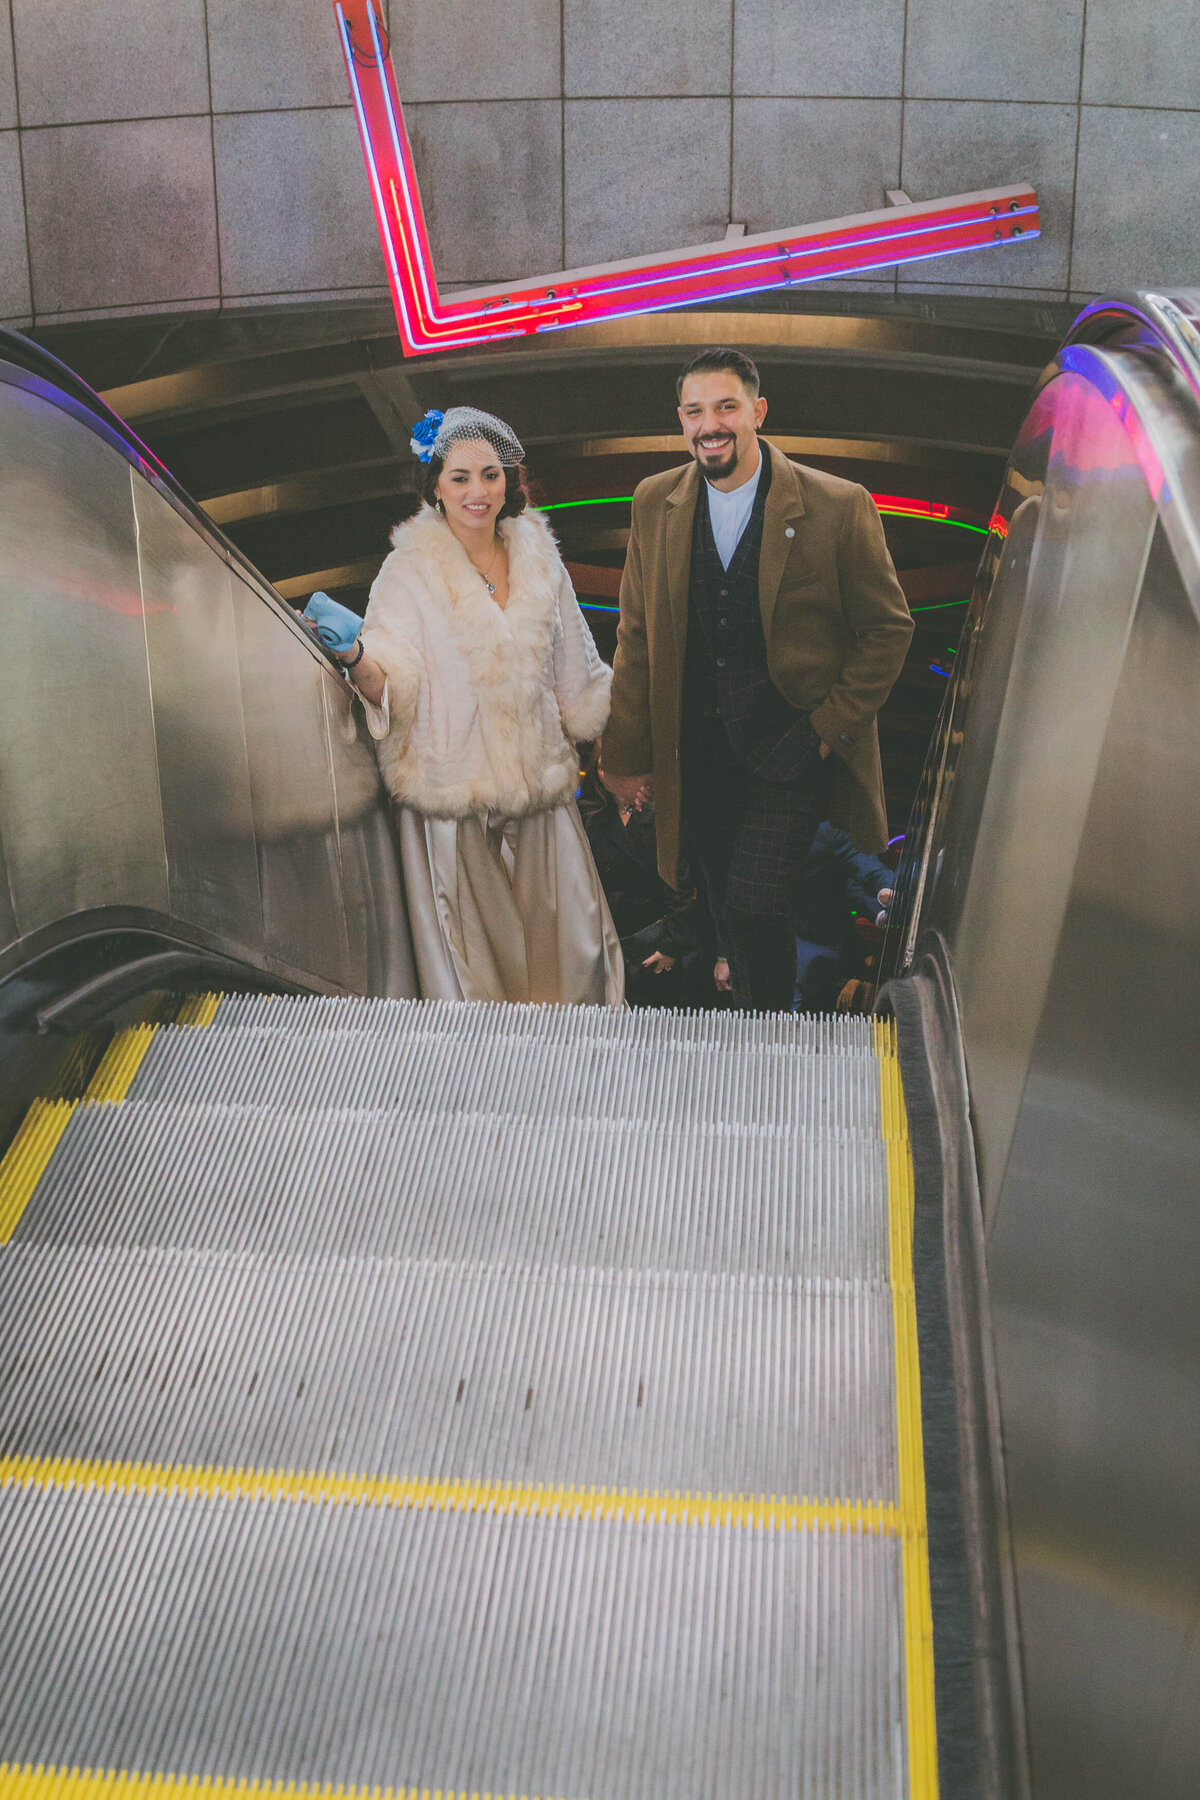 Bride and groom smile while coming up escalator.